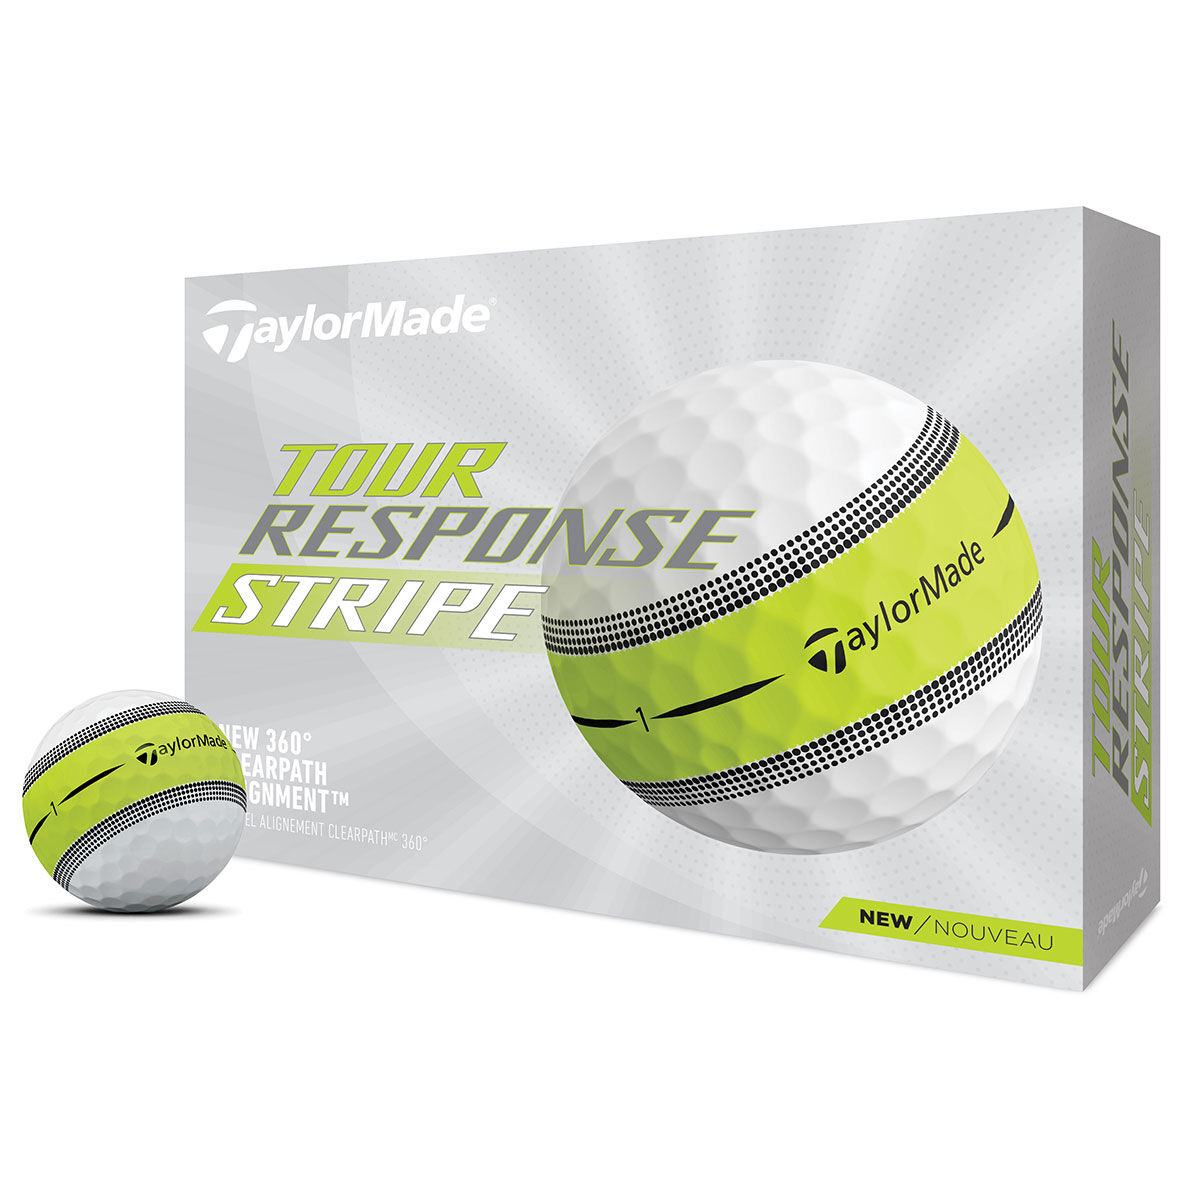 TaylorMade Golf Ball, Tour Response Stripe 12 Pack, White/green | American Golf, One Size von TaylorMade